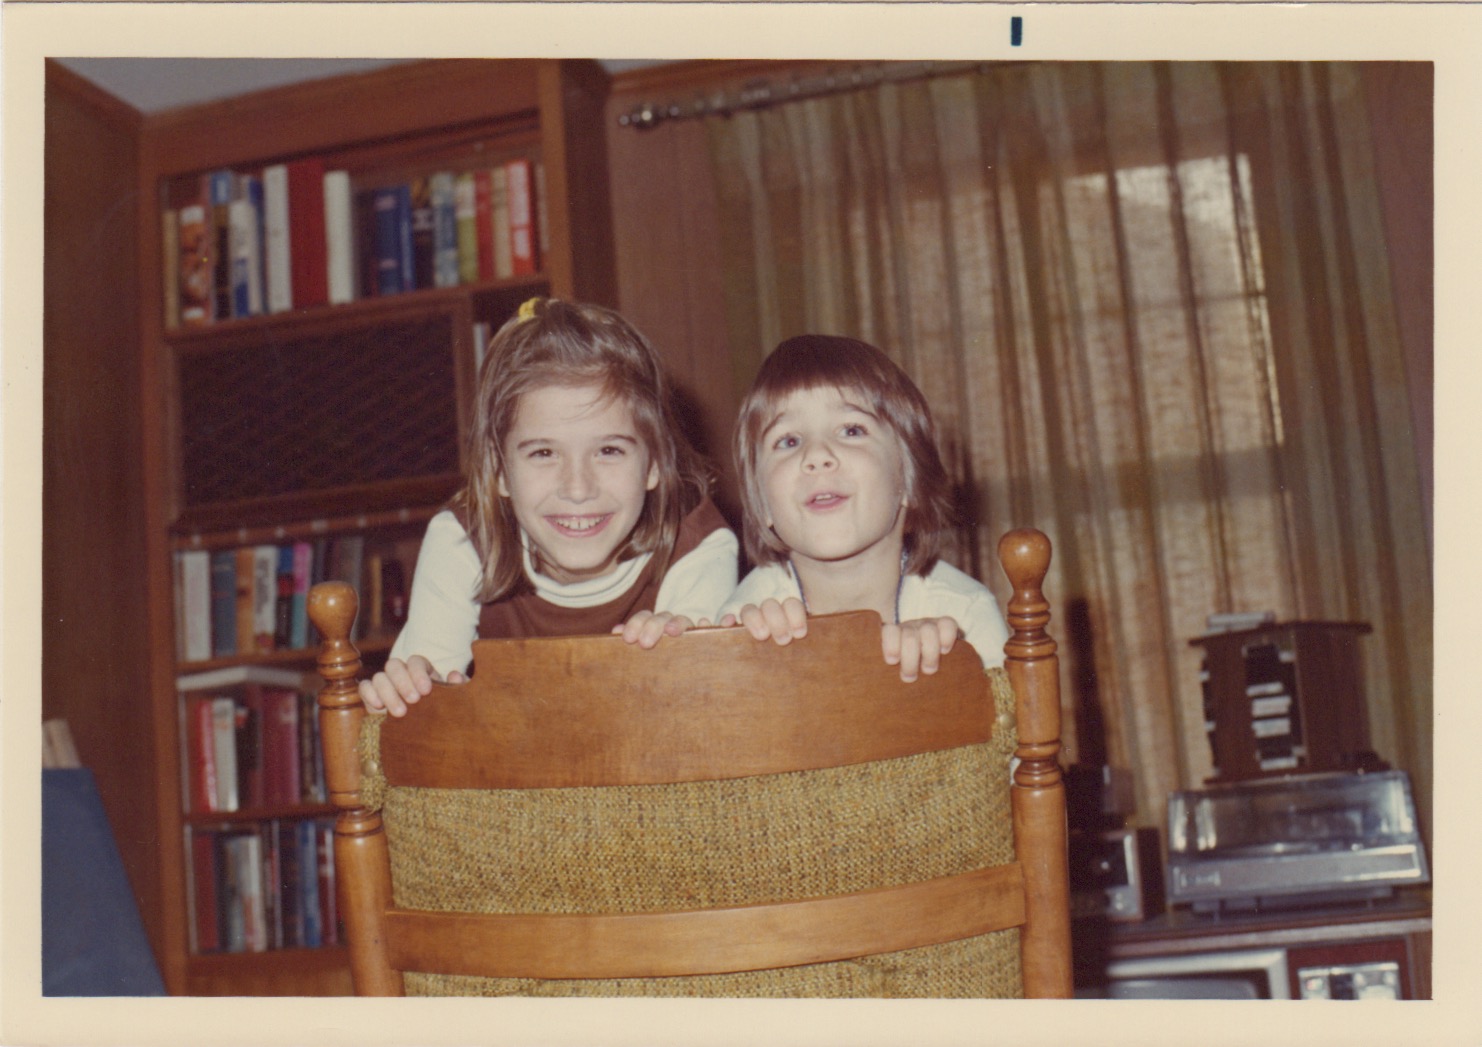 photo of Pam and her sister Bridget standing up looking over the back of a family room chair that has an open wood slat chair back. In the background is a floow-to-ceiling bookcase full of books. Next to is a French door with a curtain for privacy.